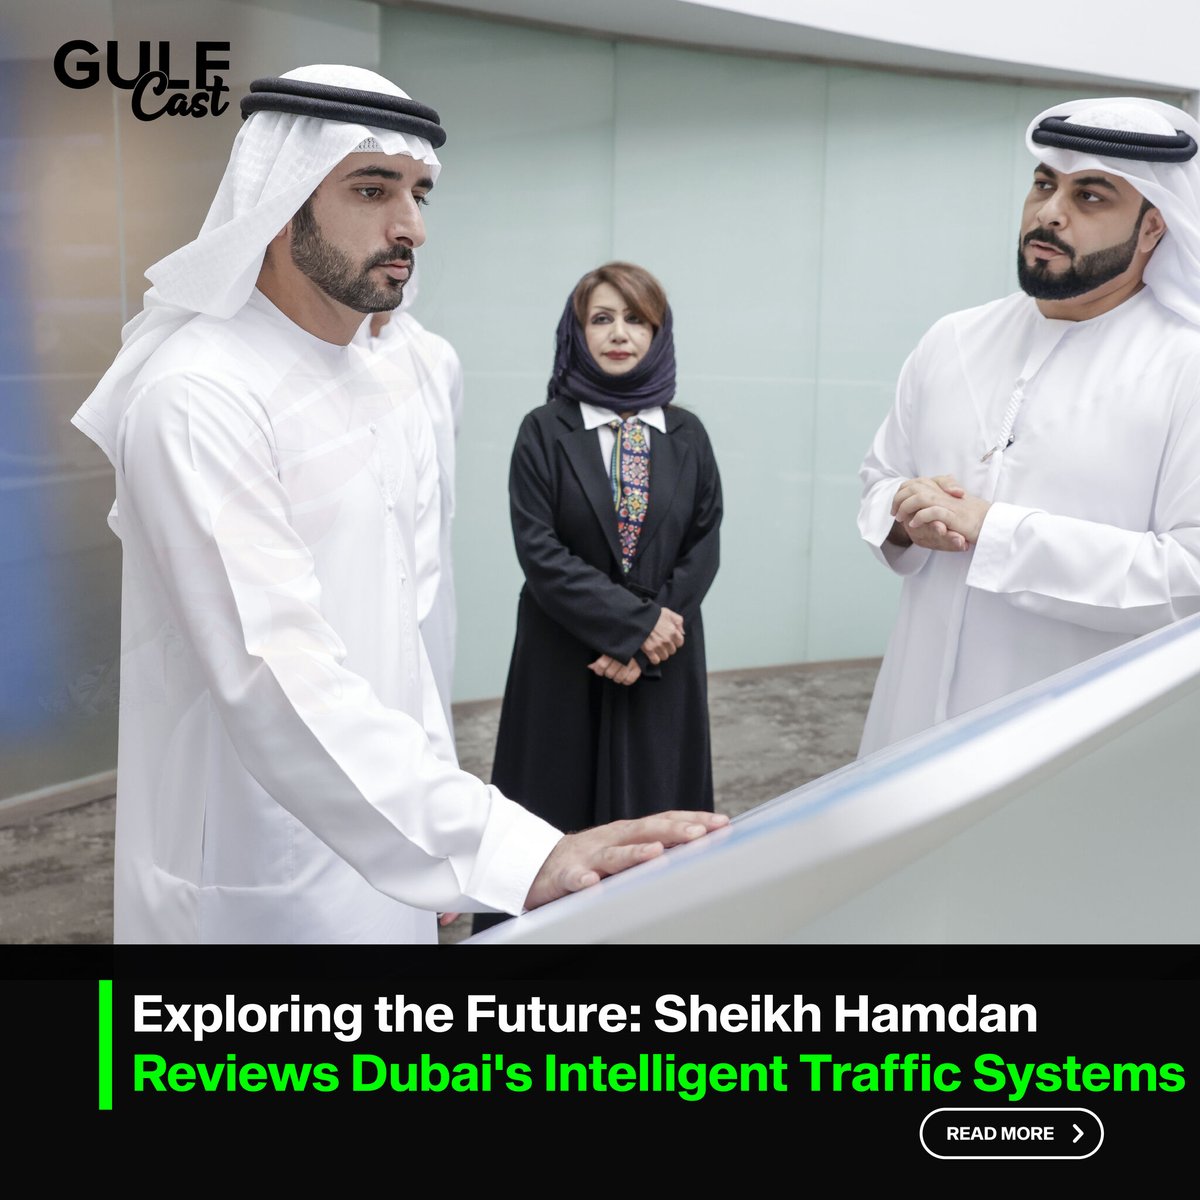 Sheikh Hamdan bin Mohammed explores the future of smart traffic in Dubai! During his visit to the Dubai ITS Centre. He learned about how cutting-edge technologies like AI & IoT are revolutionizing traffic management.
#Dubai #SmartCity #TrafficInnovation #AI #gulfcast